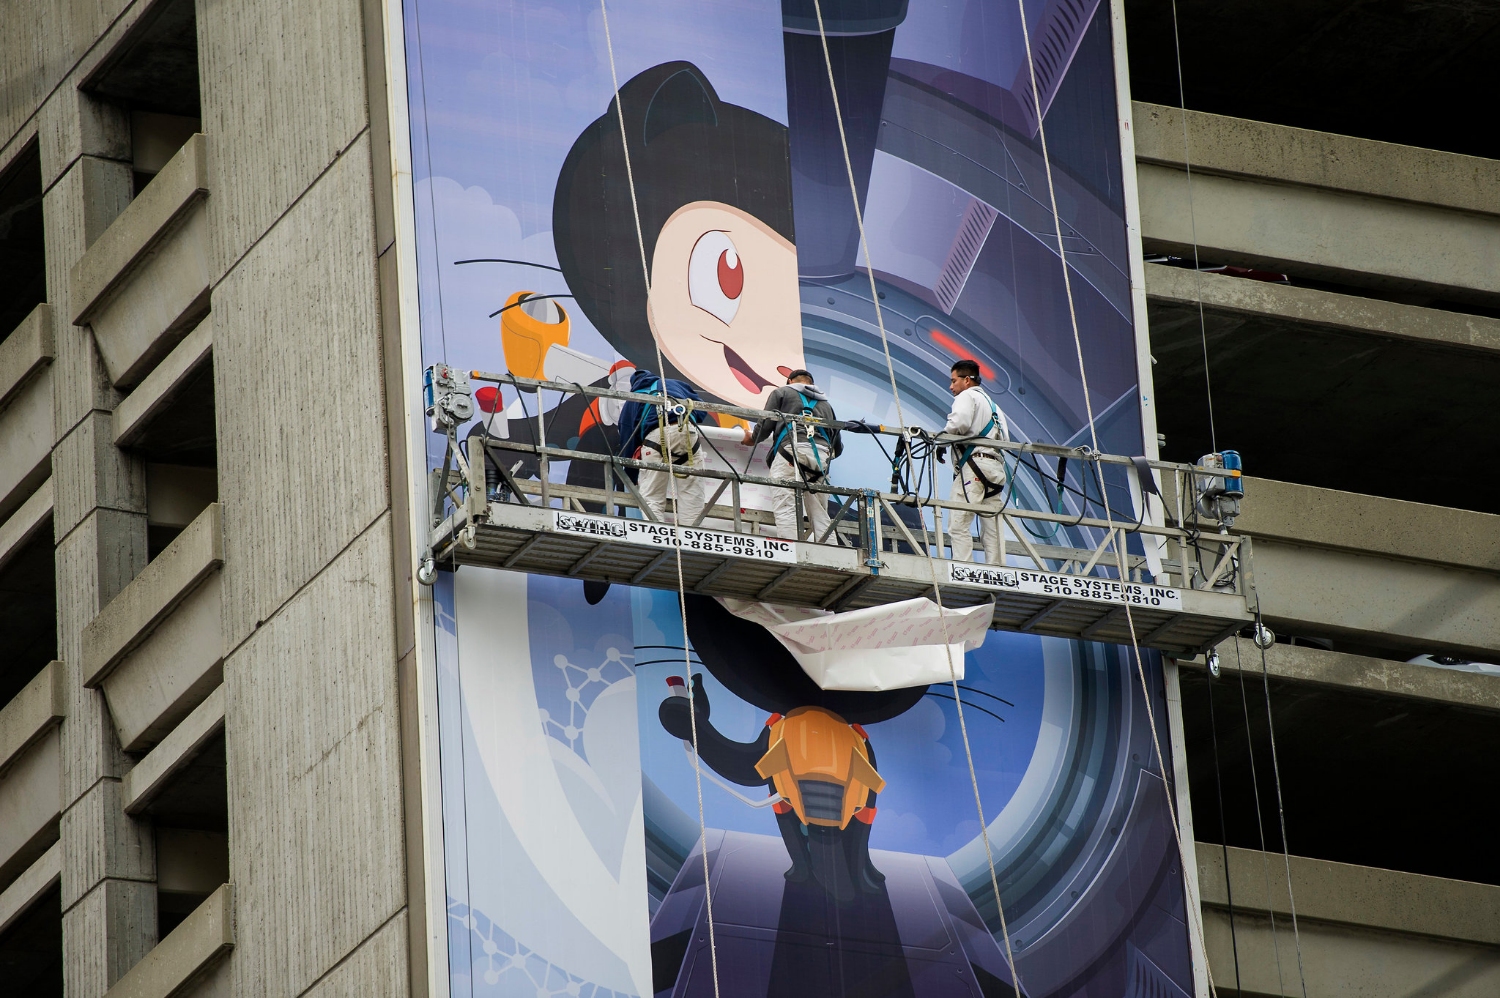 A GitHub billboard being installed in San Francisco in 2014. Microsoft said on Monday that it would acquire the company for $7.5 billion.CreditDavid Paul Morris/Bloomberg